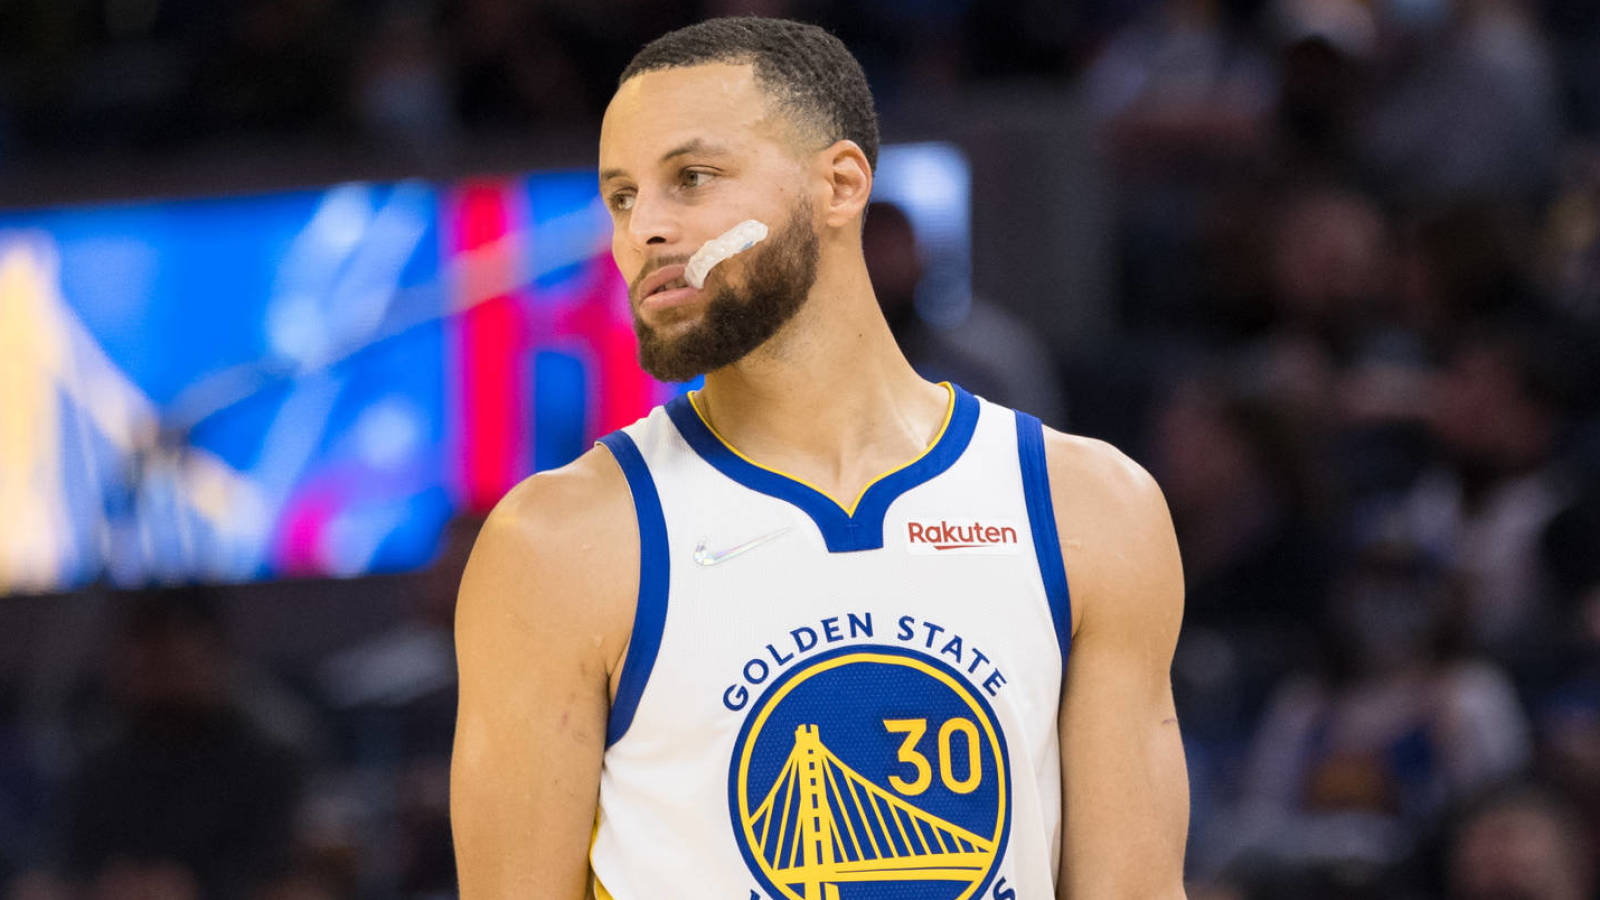 Steph Curry's Dad Tells Sons to Stay Focused During Playoff 'Rough Patch